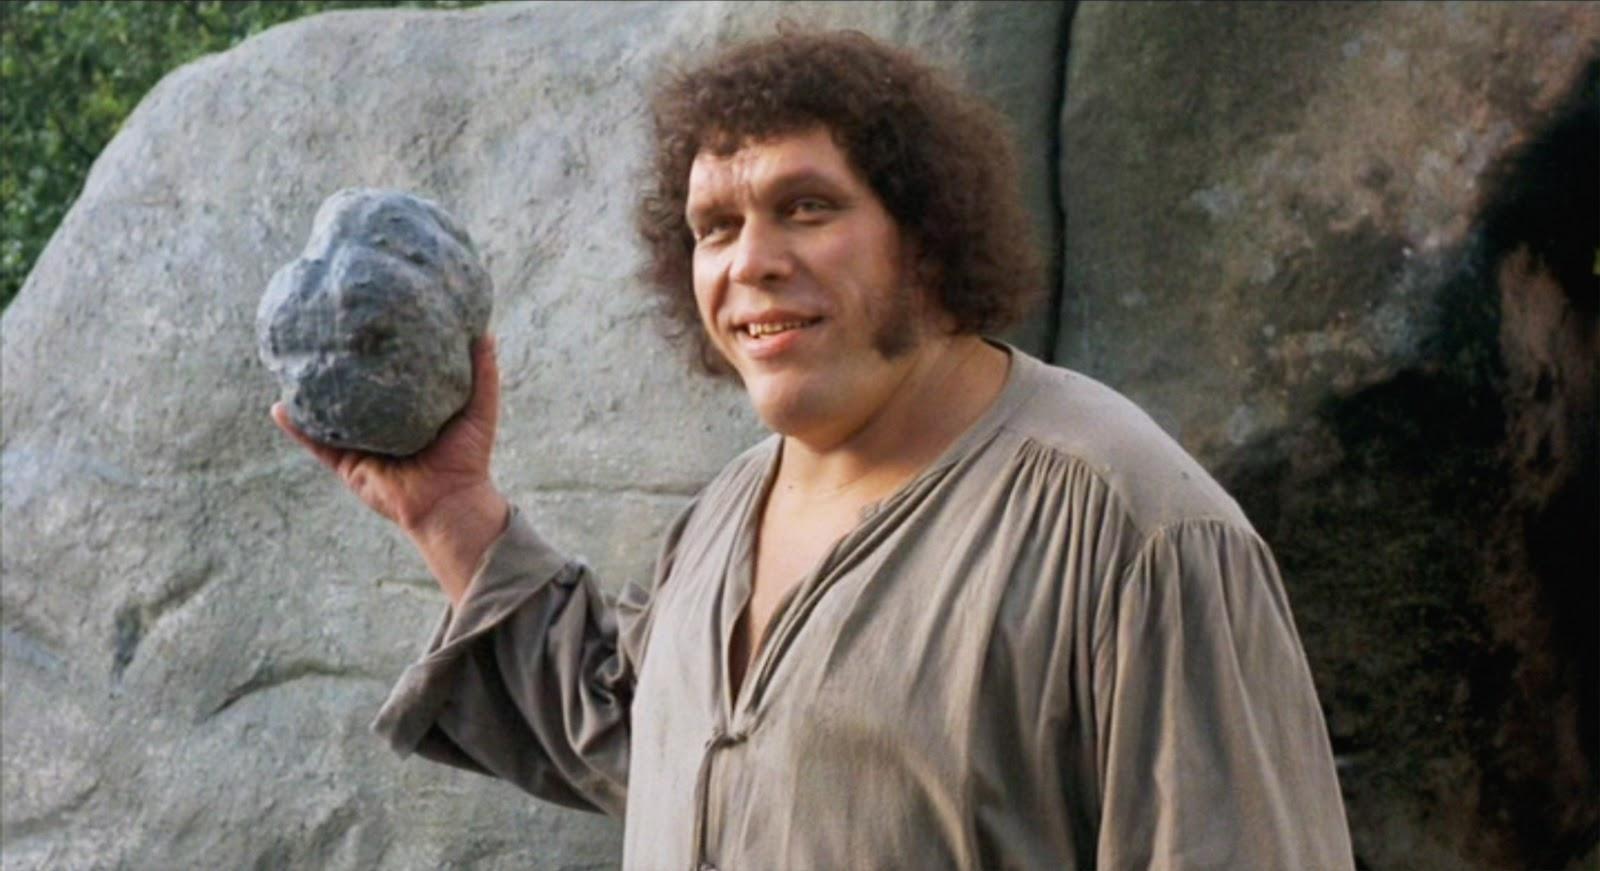 Andre the Giant in The Princess Bride